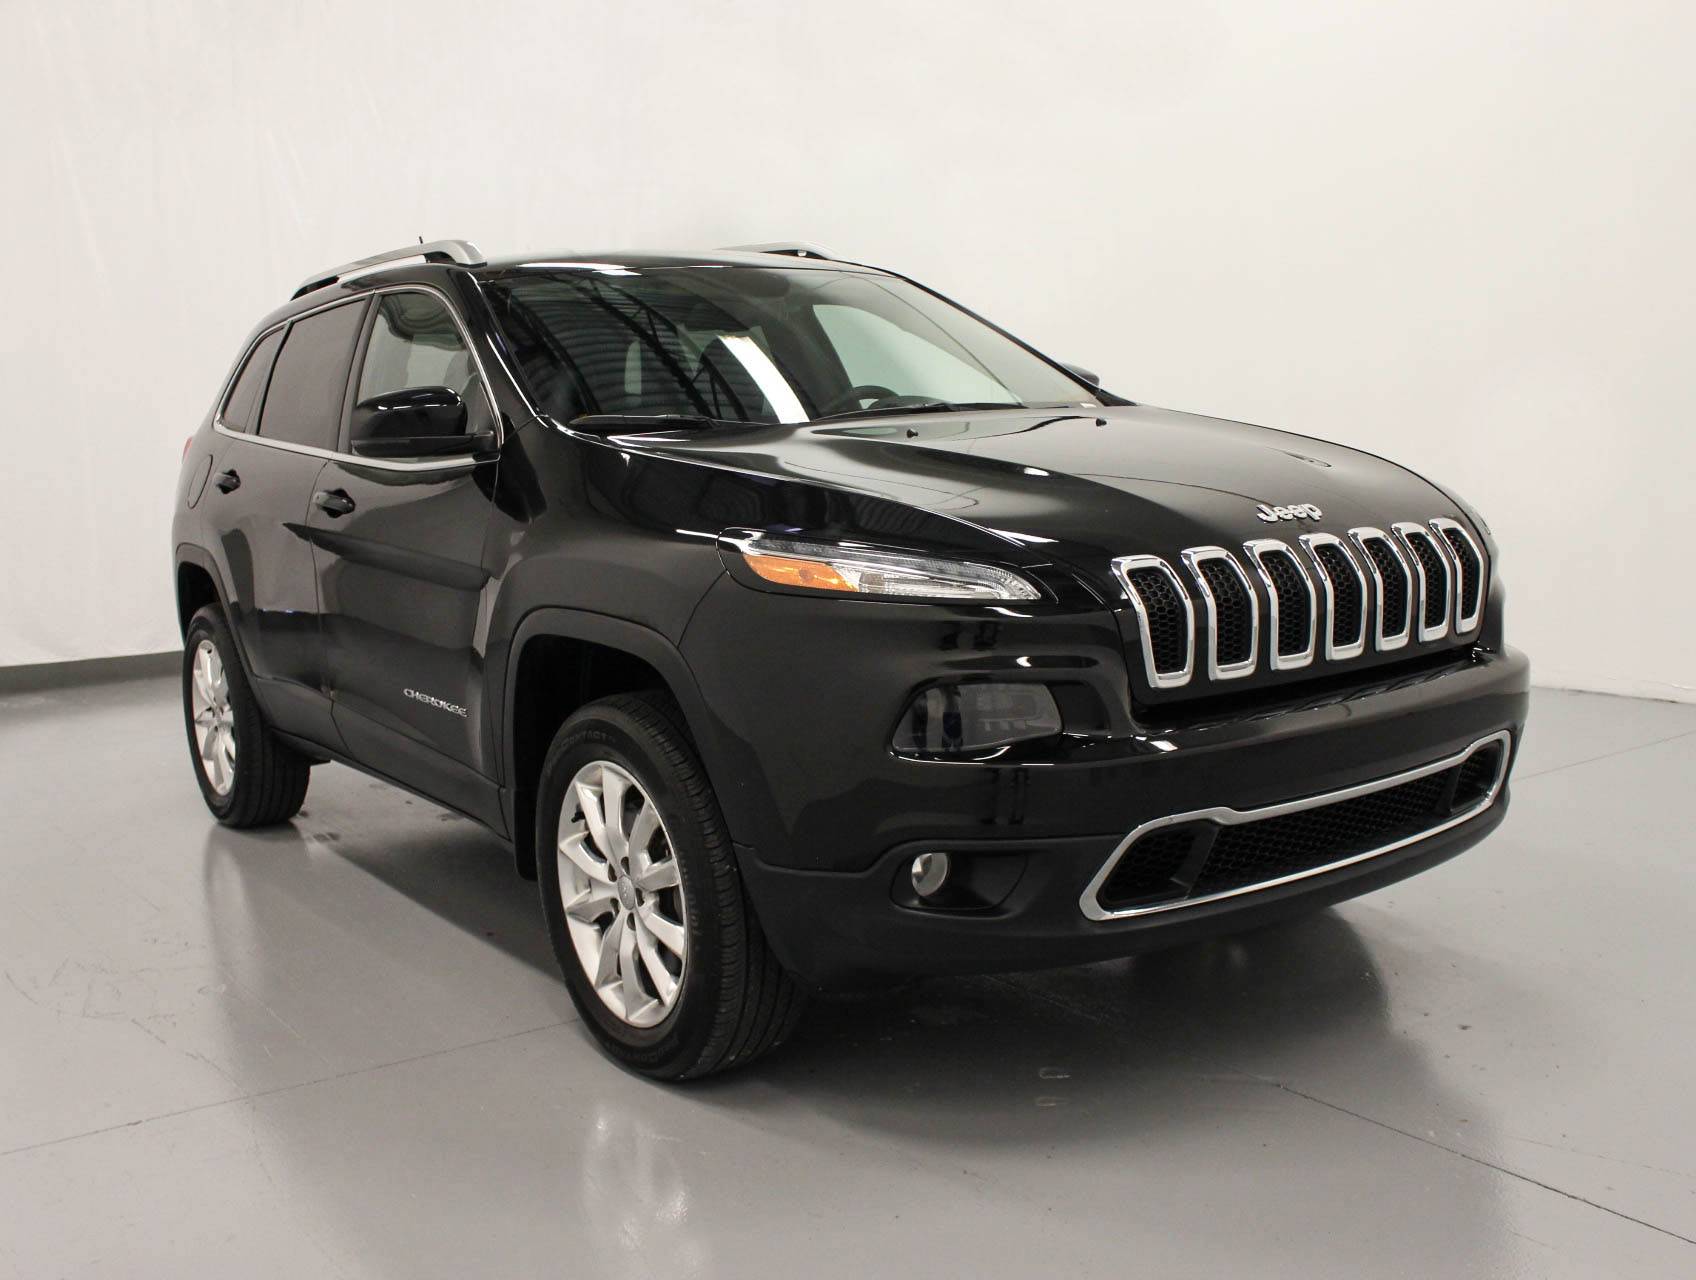 Florida Fine Cars - Used JEEP CHEROKEE 2015 MARGATE Limited 4x4